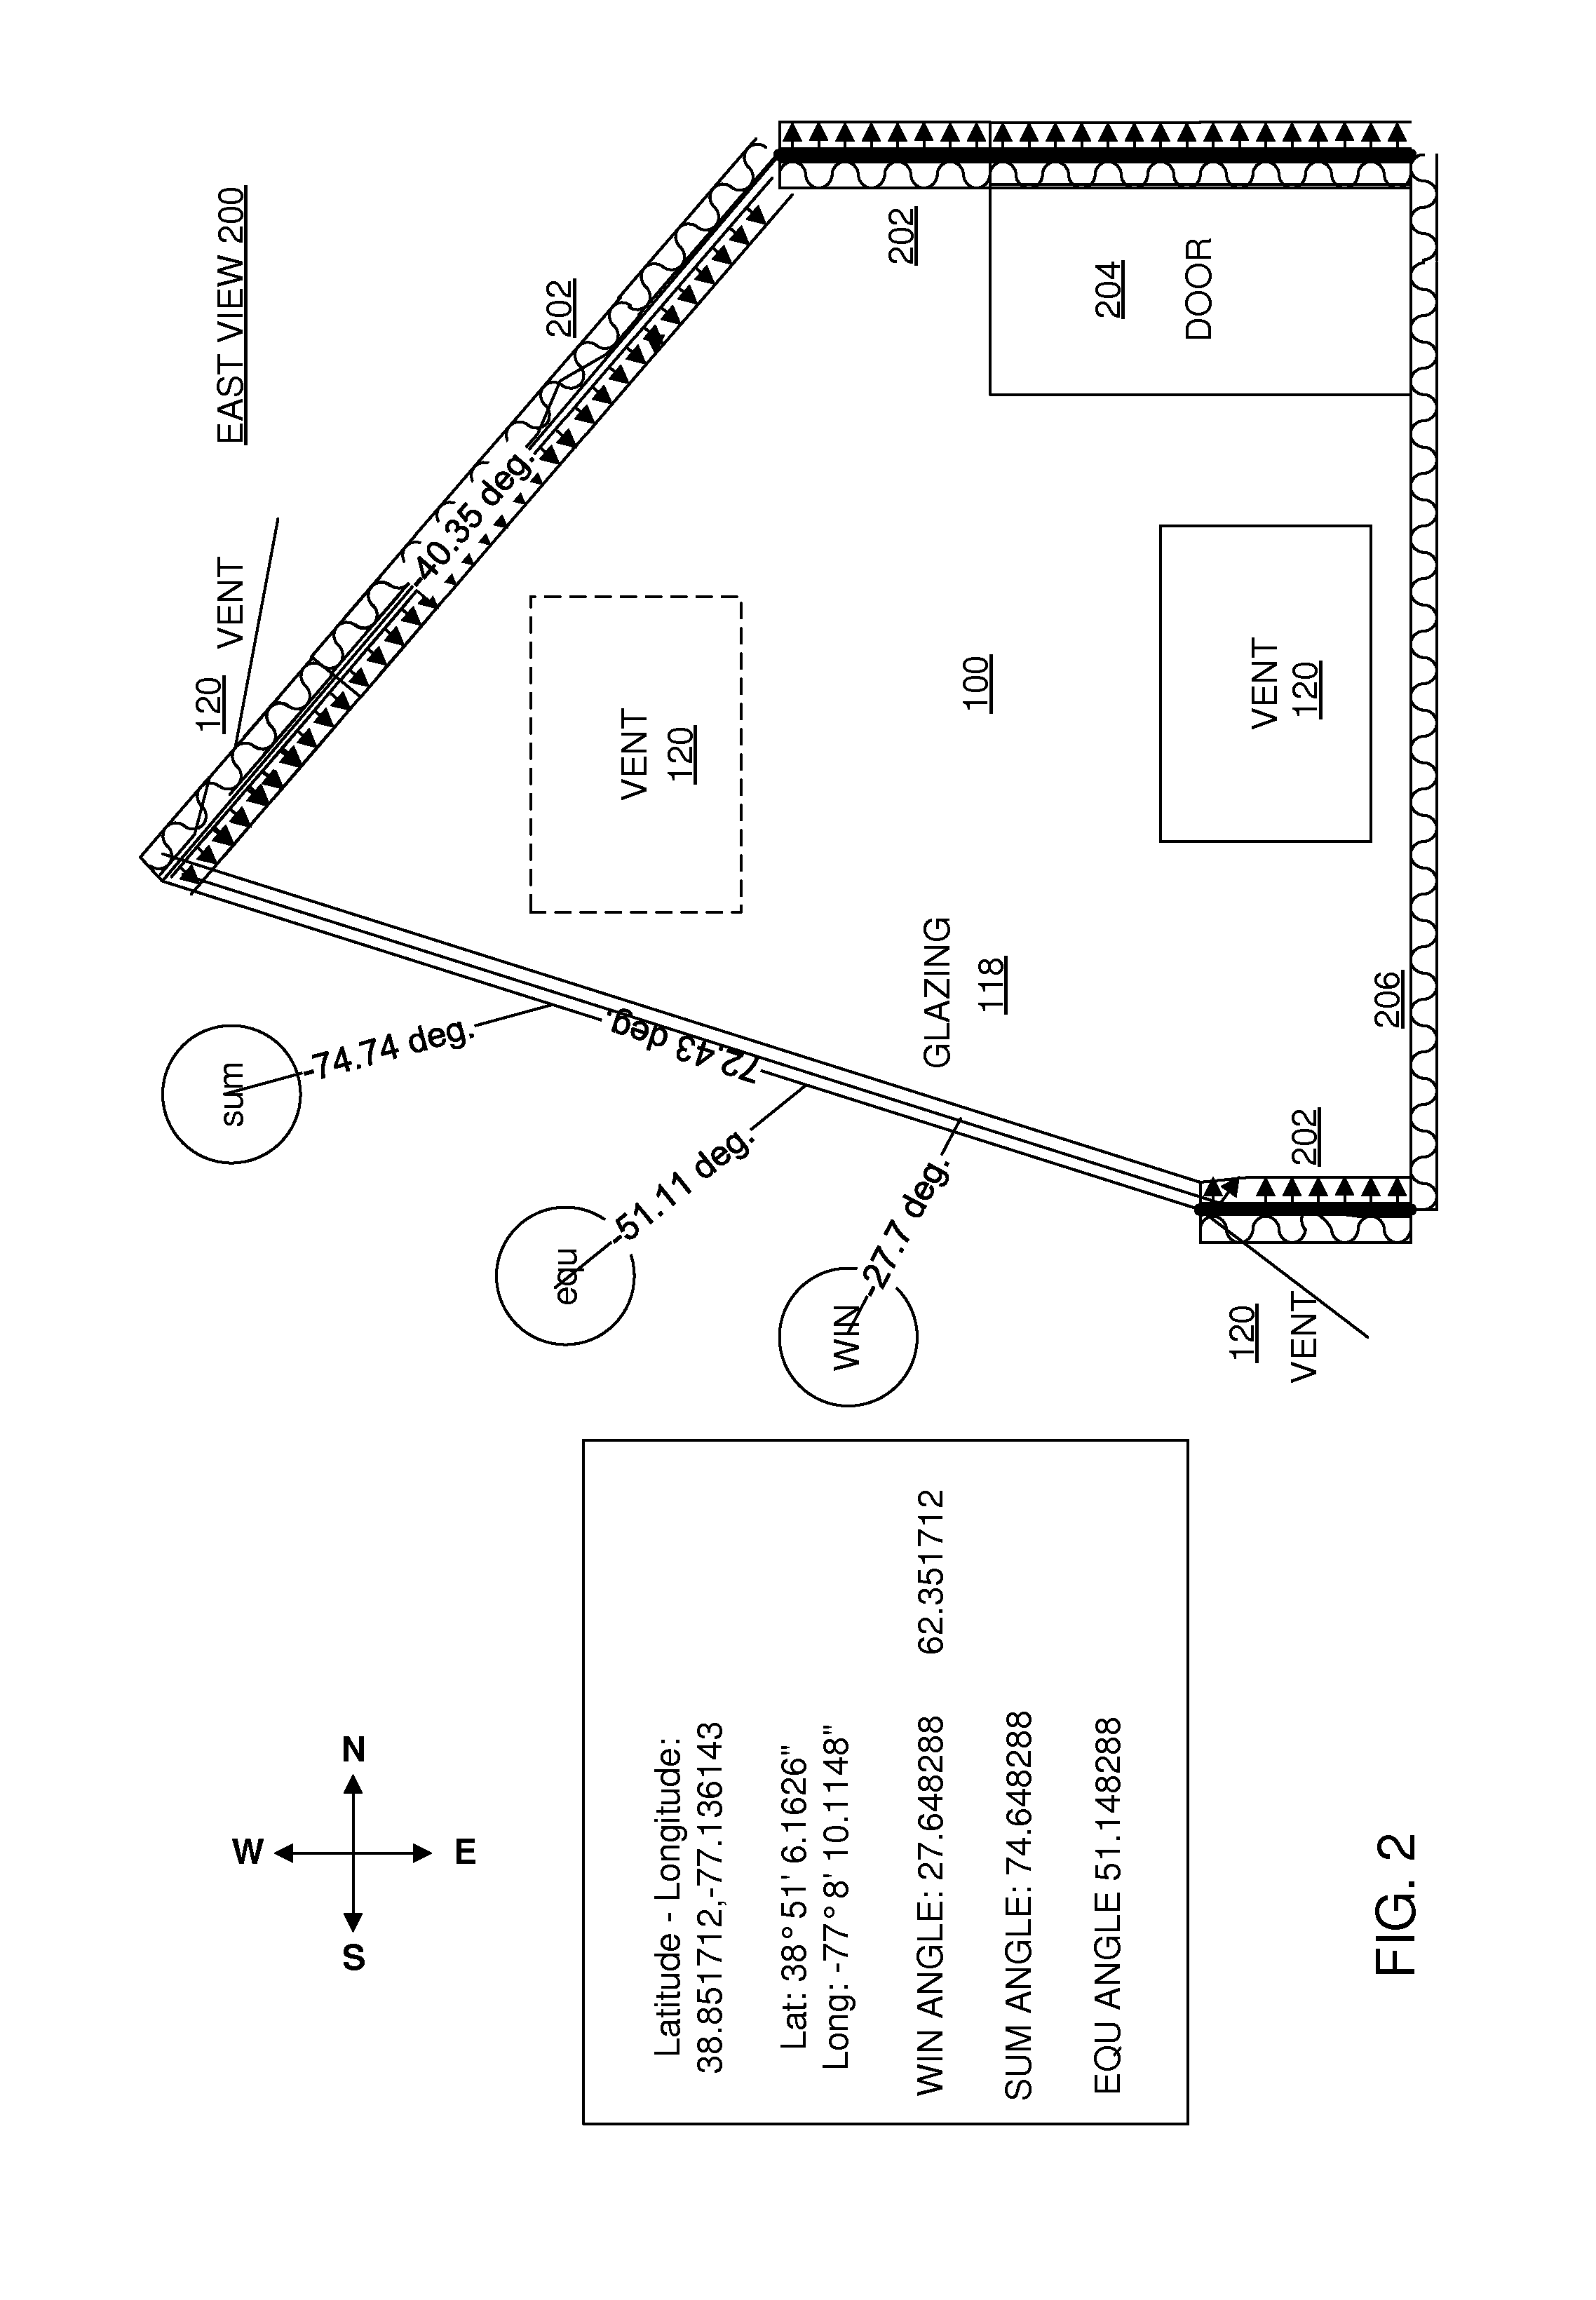 System and method for solar greenhouse aquaponics and black soldier fly composter and auto fish feeder